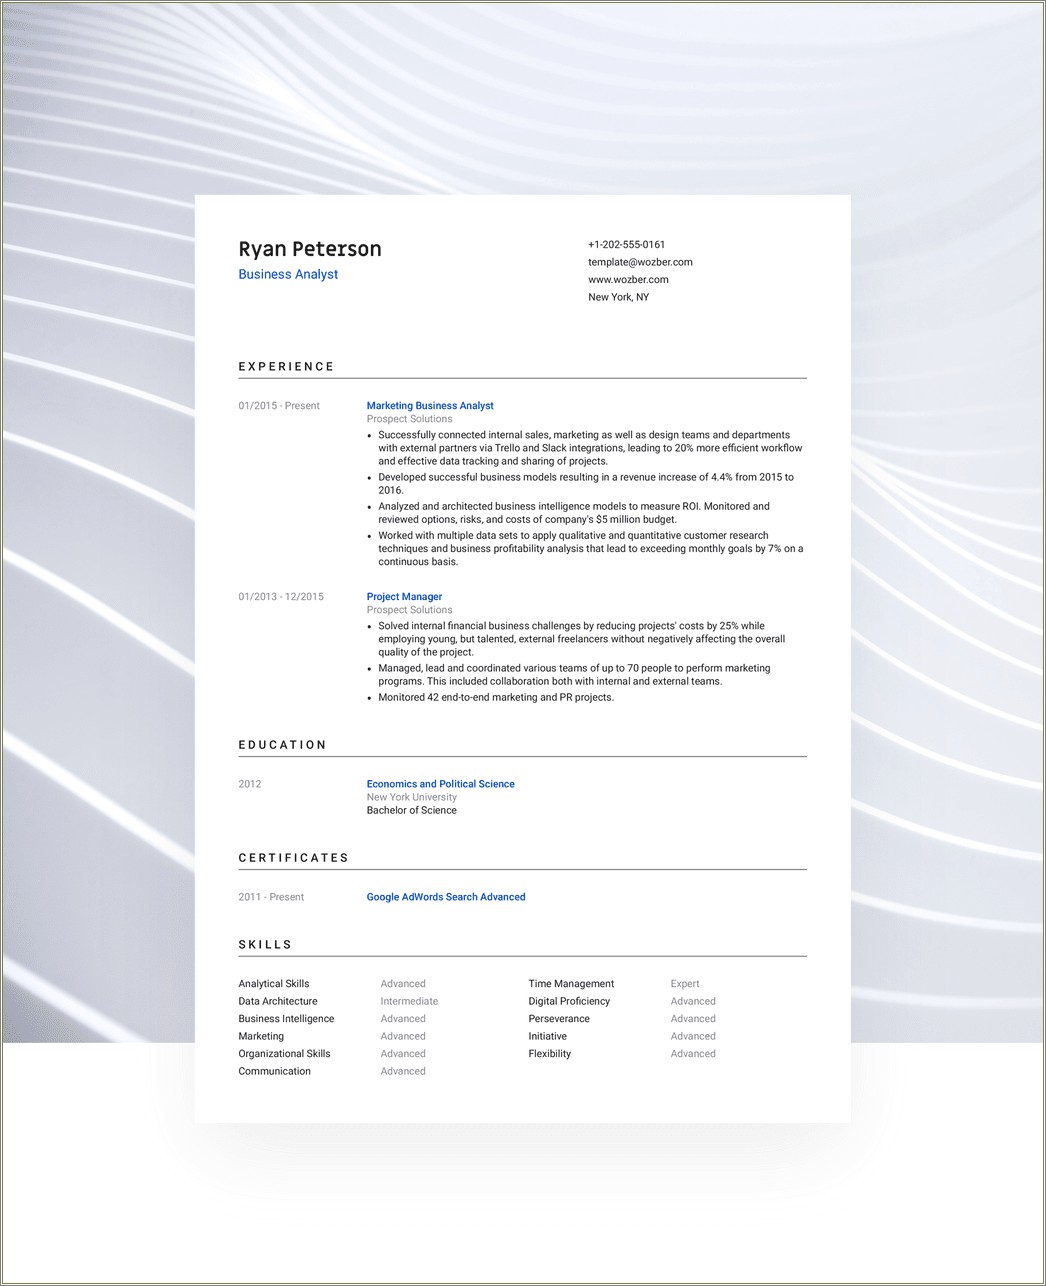 Are Resume Templates Ok To Use